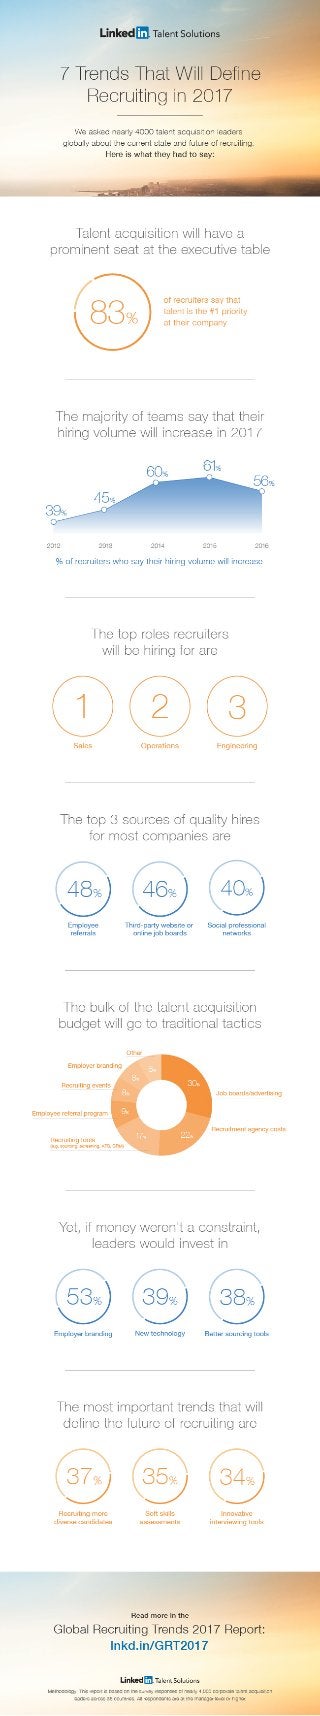 Global Recruiting Trends 2017 [Infographic]